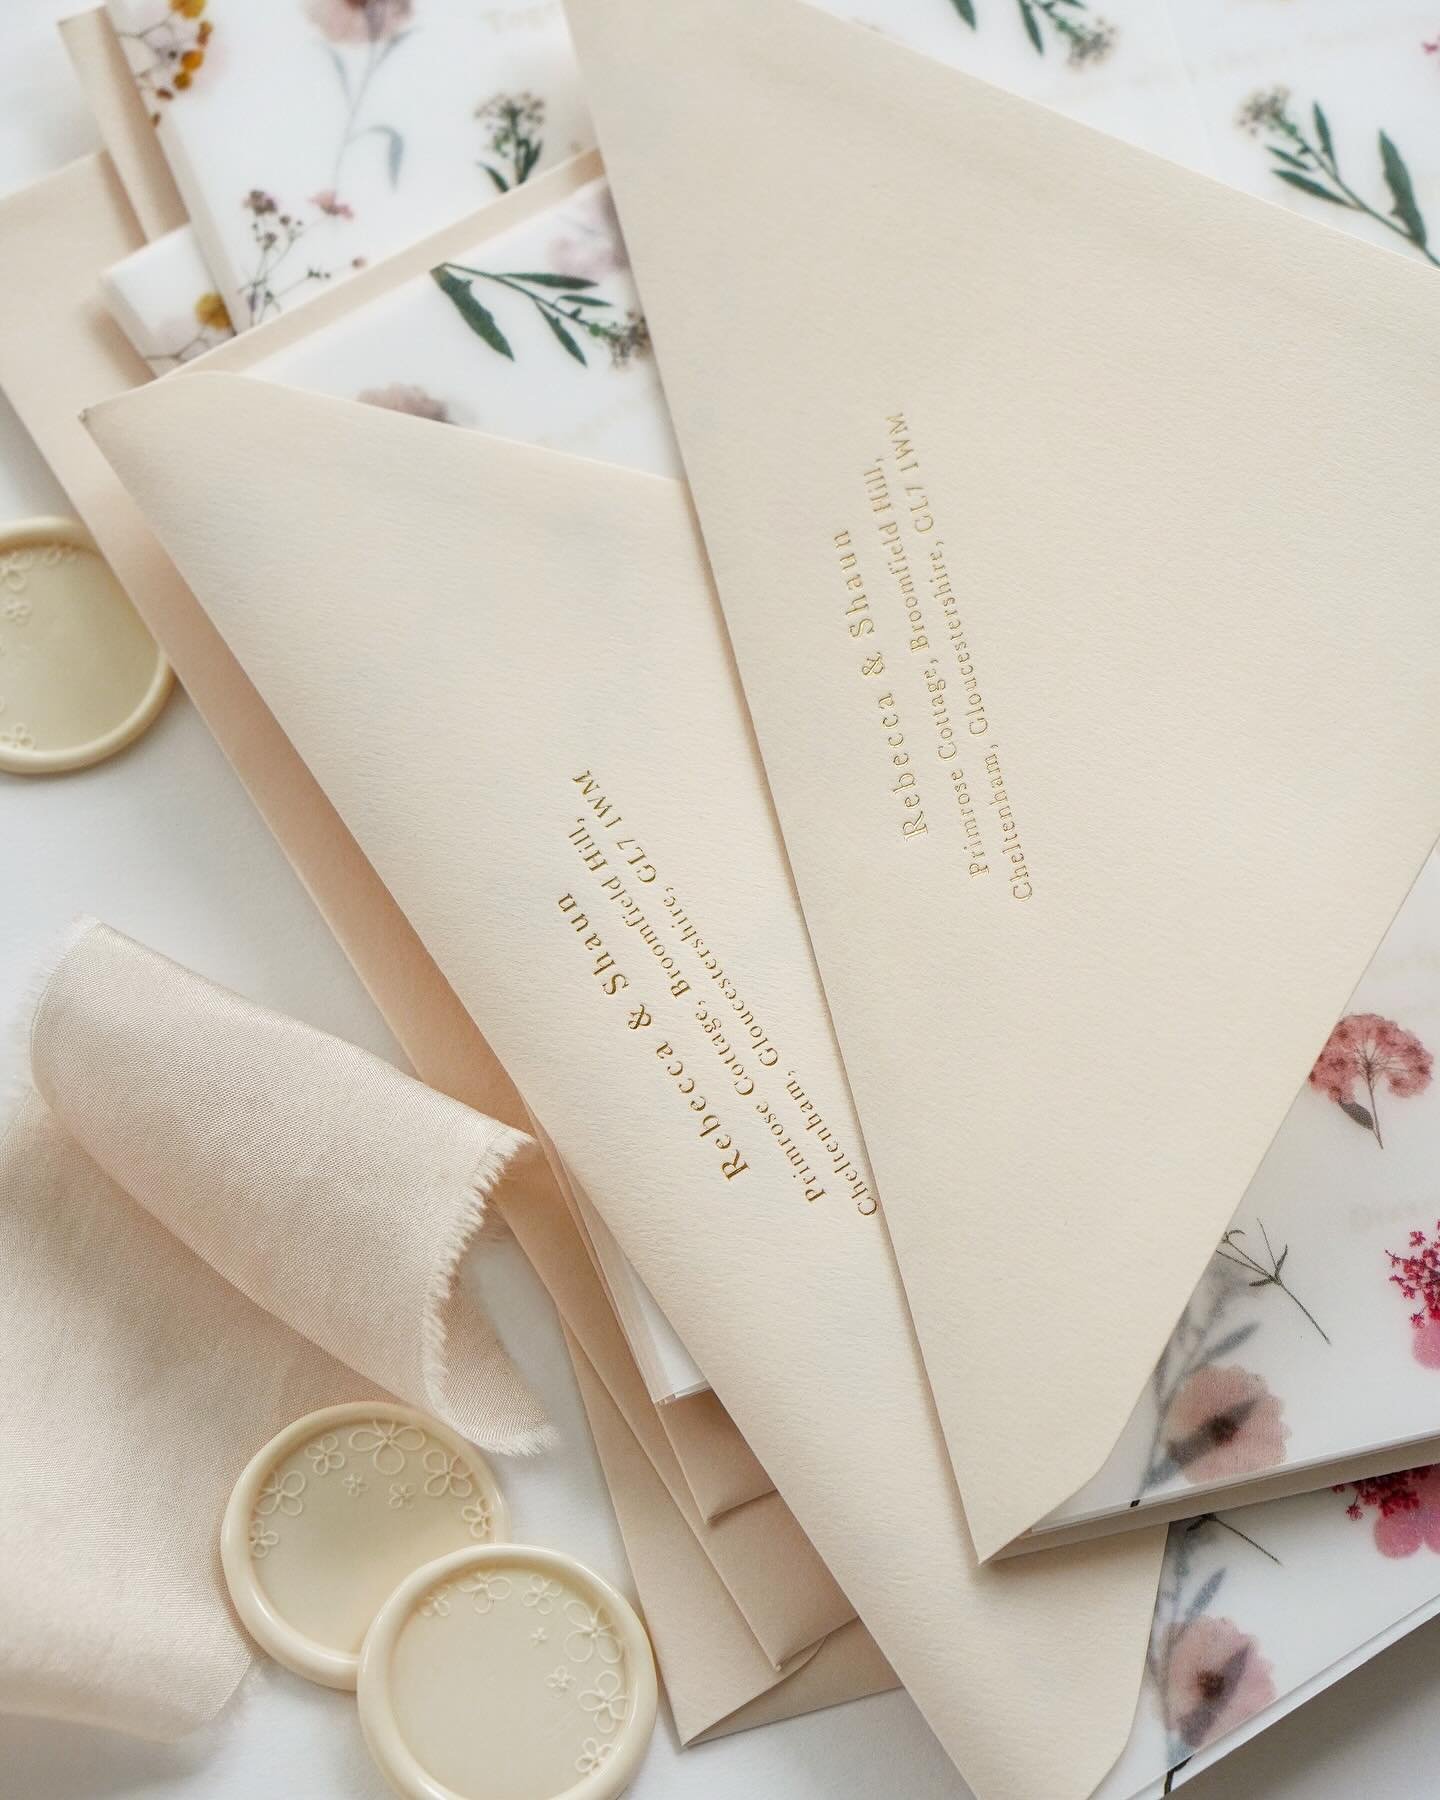 There are so many accessories you can add to your invitation suite to make them just that extra bit special and even more personal to you! ✨

Some ideas pictured here include floral envelope liners, vellum wraps, buttercream wax seals and a return ad